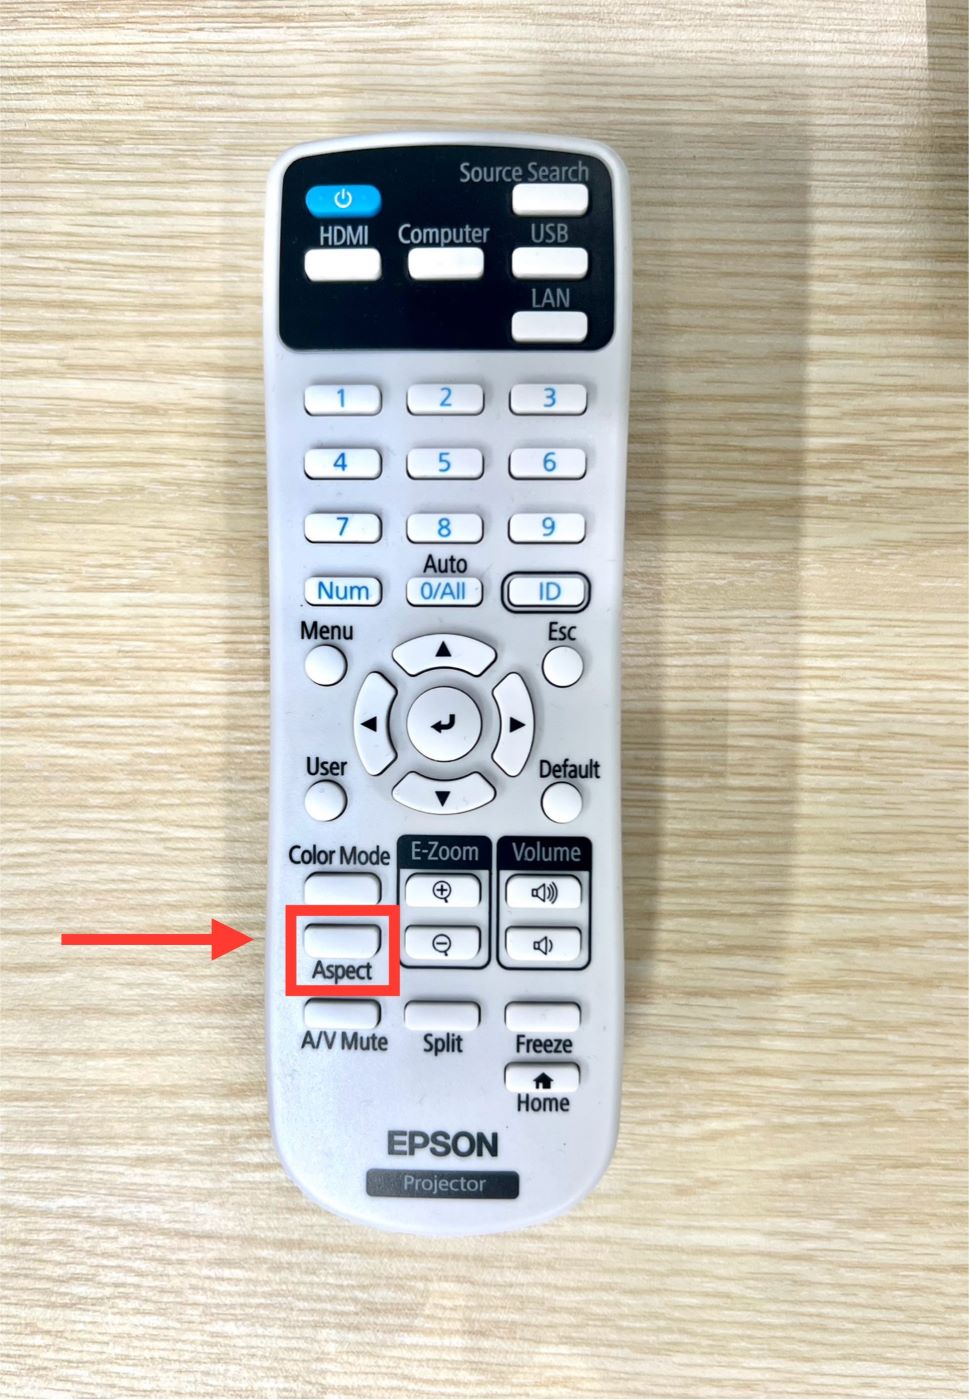 aspect button on an epson remote